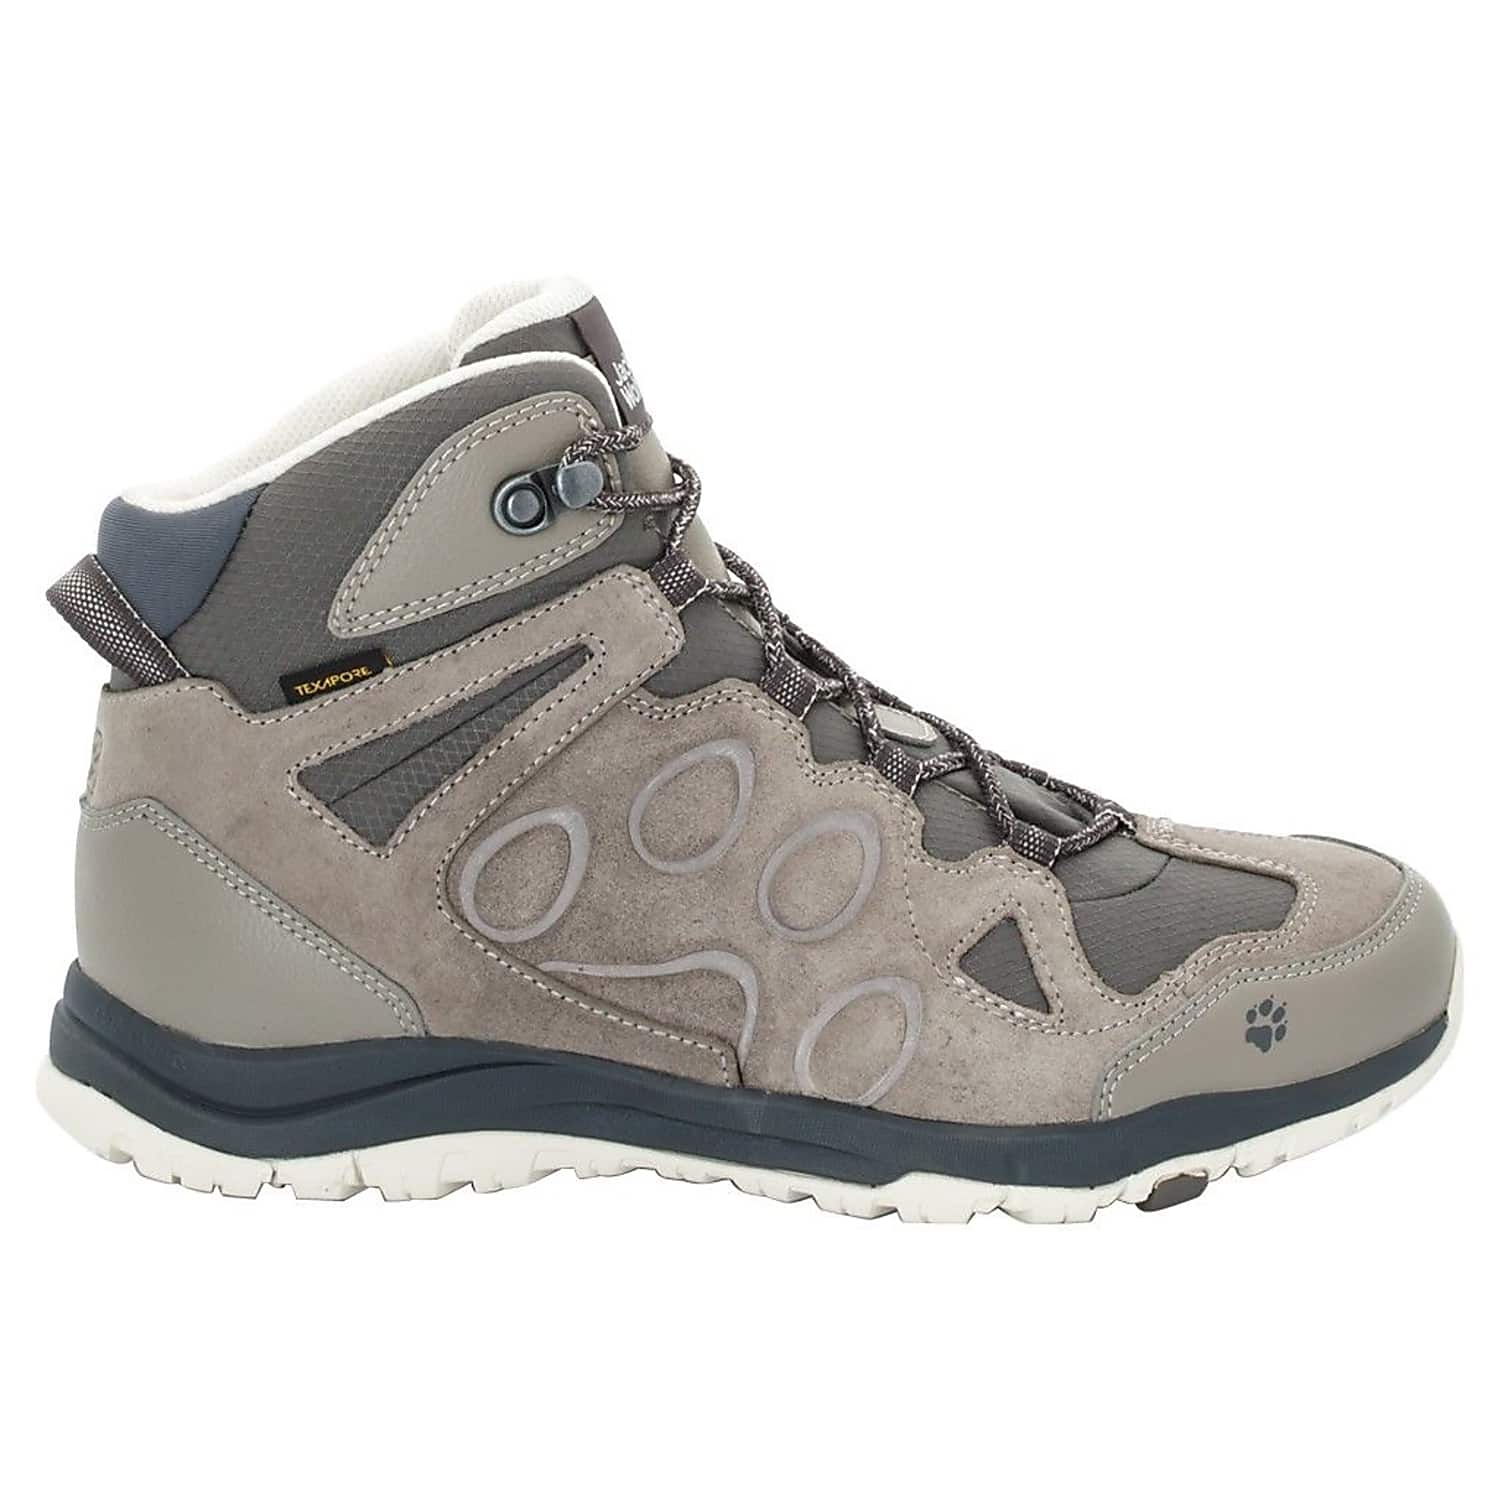 Snooze vacht beproeving Jack Wolfskin W ROCKSAND TEXAPORE MID, Siltstone - Fast and cheap shipping  - www.exxpozed.com